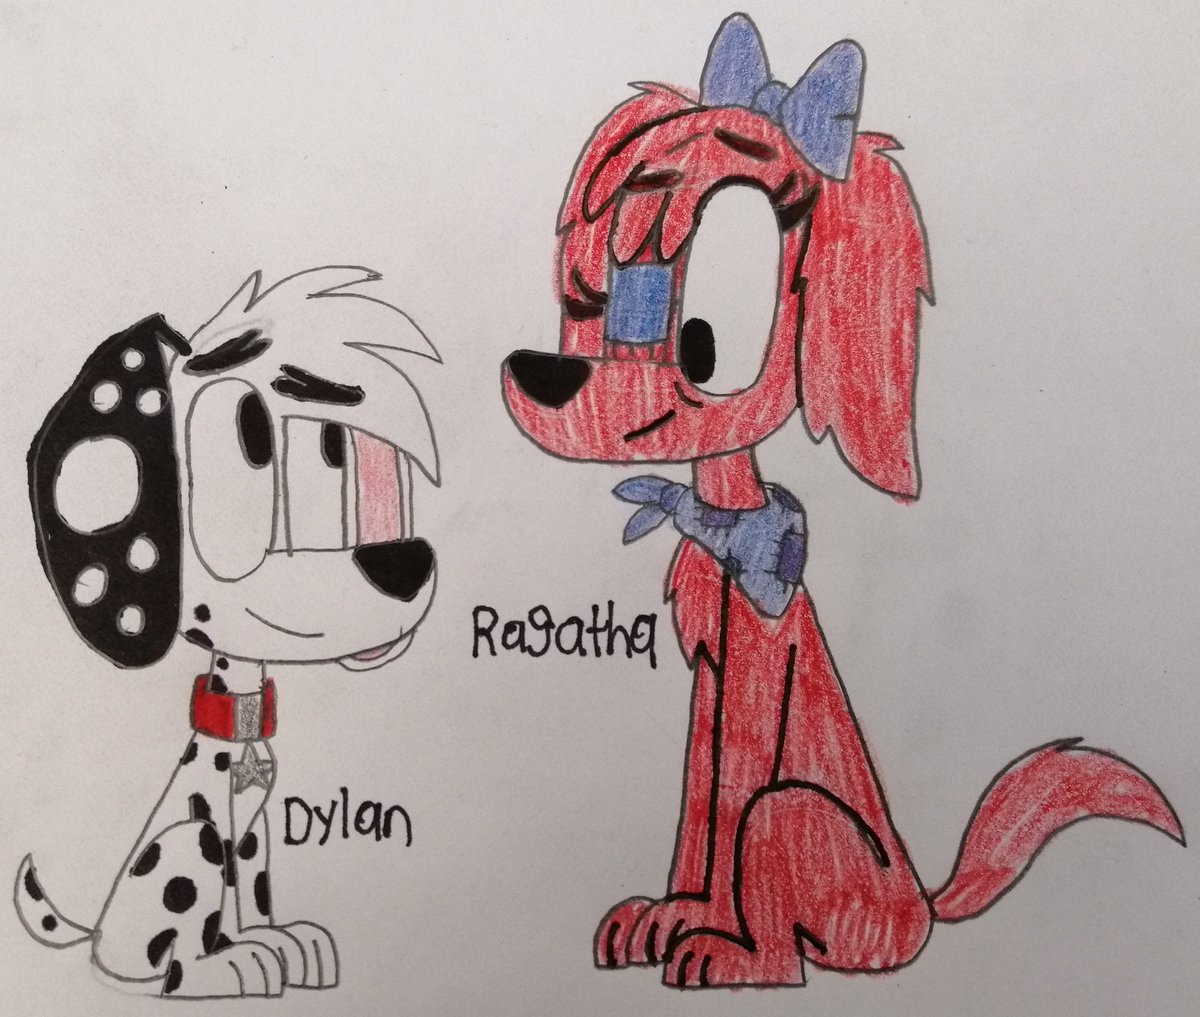 Happy (Late) Birthday To The Wonderful And Talented @JustTheClippy This Is A Drawing I Made Before, But K Thought It Would Be Nice To Repost It, So Have Saluki Ragatha With Dylan #101Dalmatians #101DSSeason2 #101DalmatianStreet #101DS #101dalmatianstreetfanart #tadcfanart #TADC